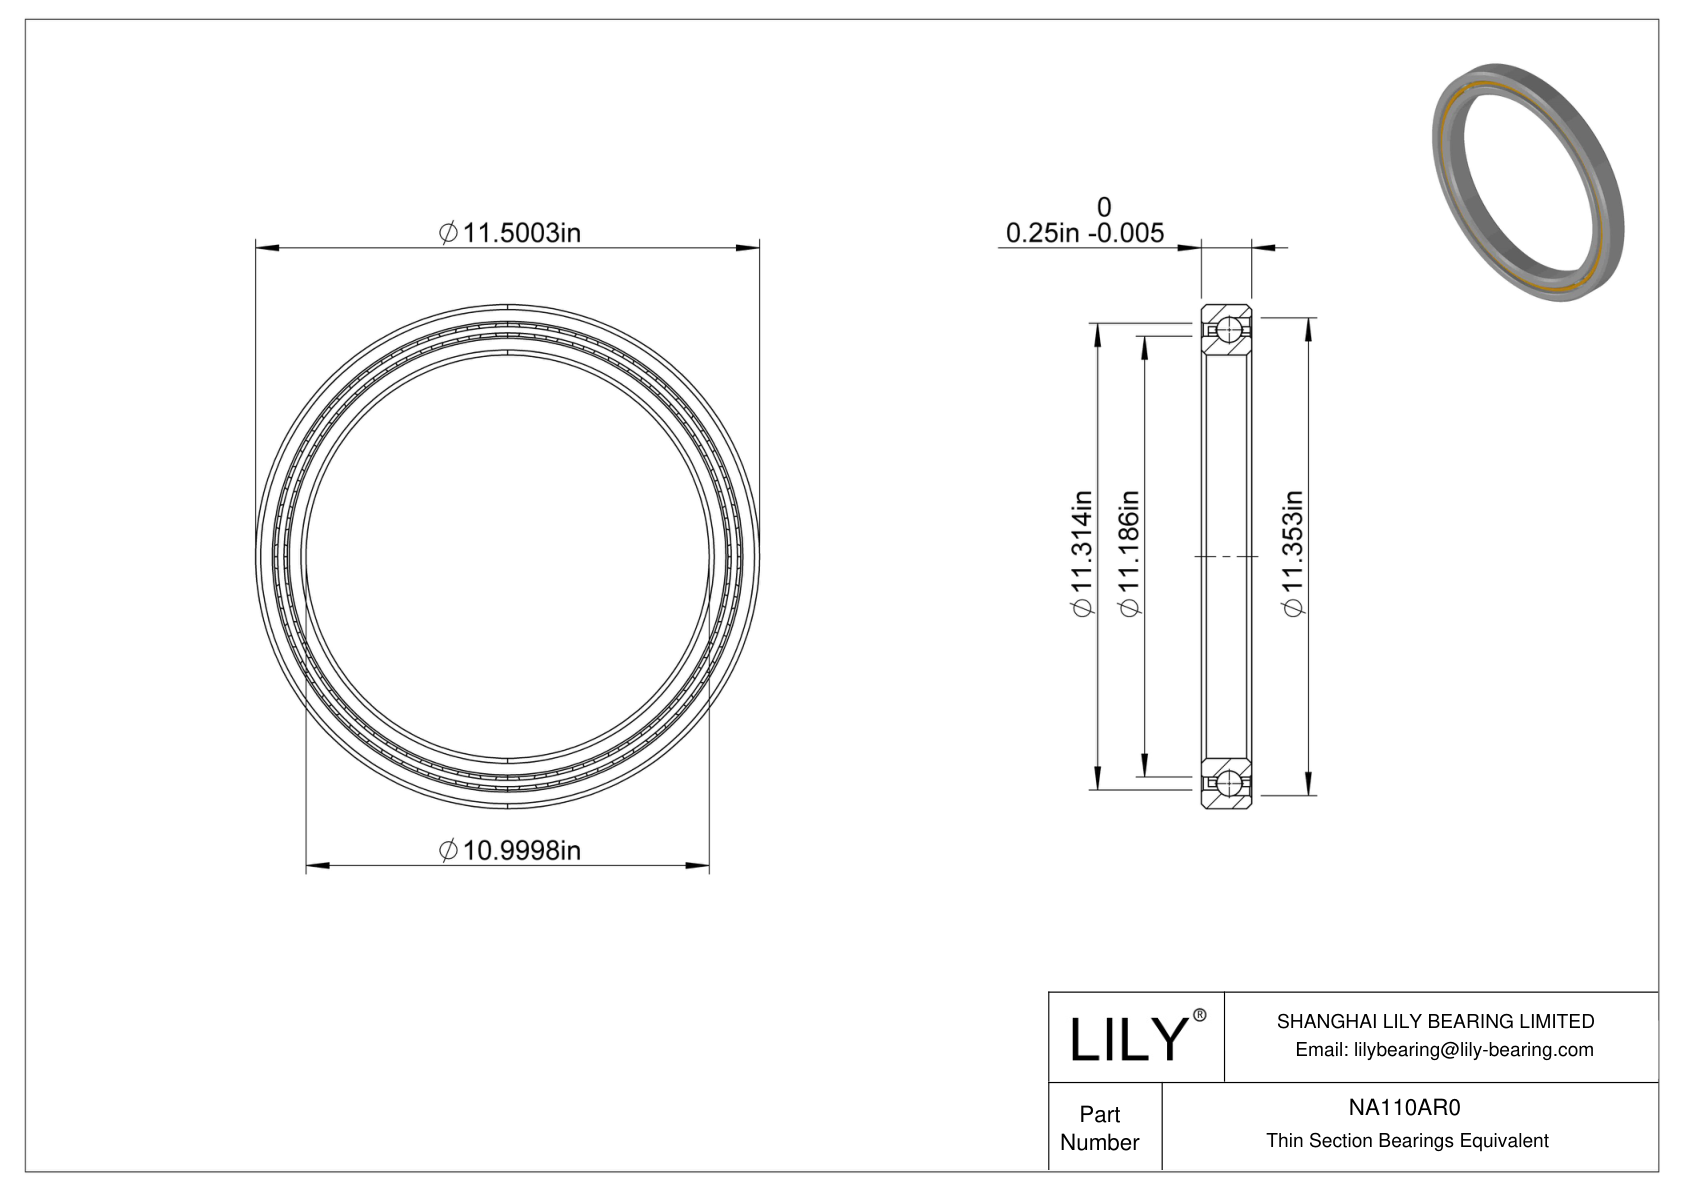 NA110AR0 Constant Section (CS) Bearings cad drawing